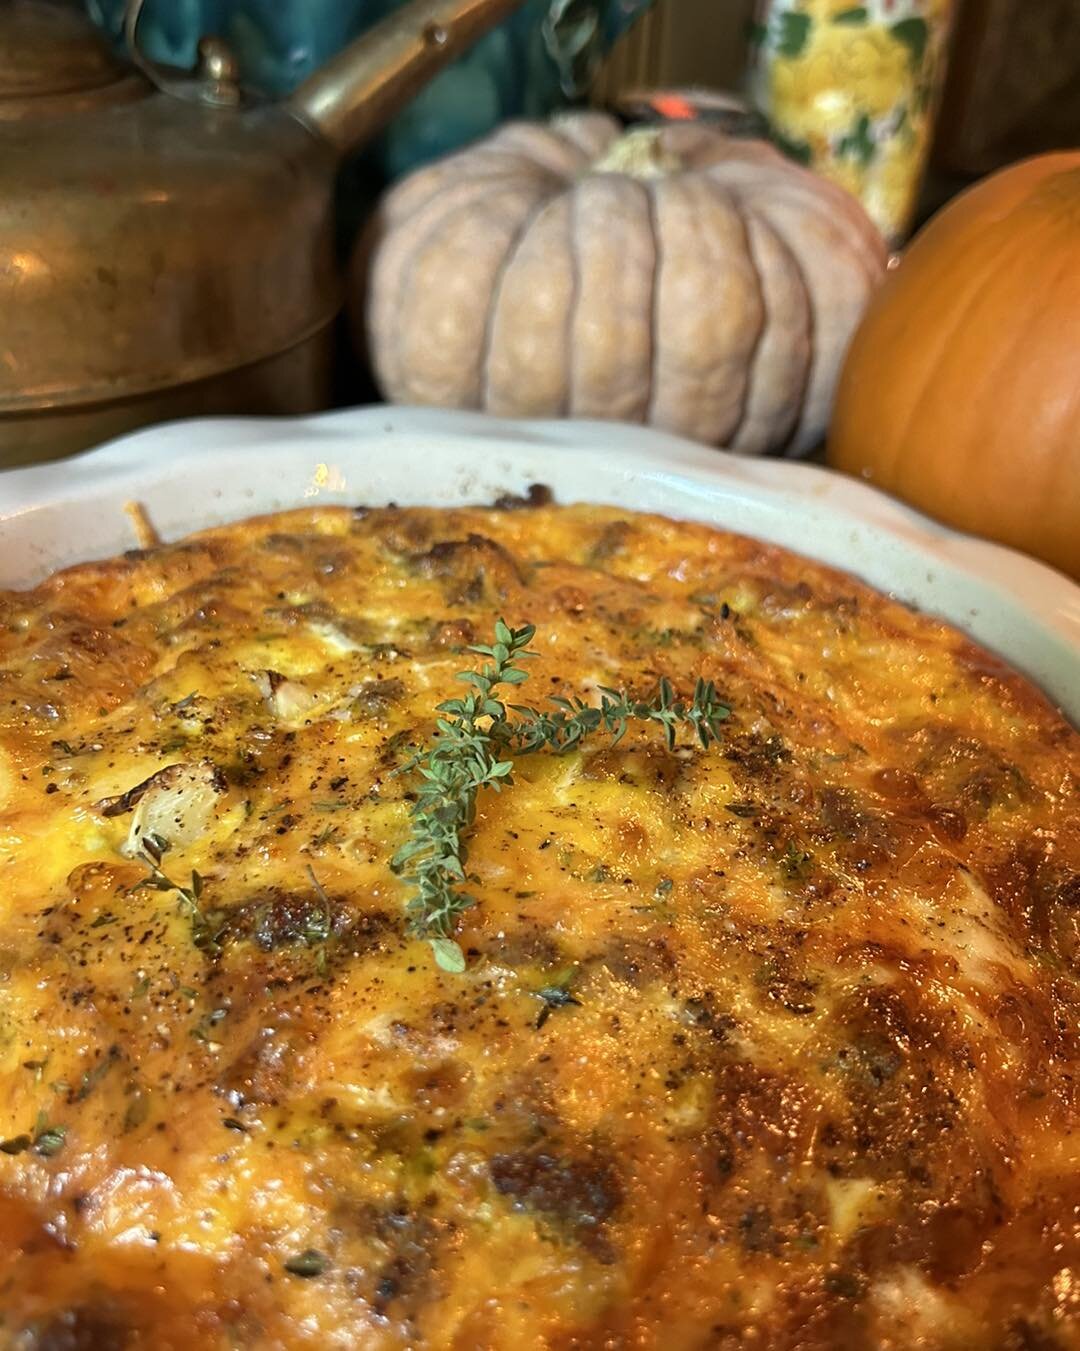 &ldquo;🍁 🌾🌻 A cozy frittata on a chilly fall morning. This one has foraged mushrooms, garden thyme and local sausage. We love offering seasonal menu items to highlight the beauty of the season. 

If you&rsquo;re planning a trip to the upper Buffal